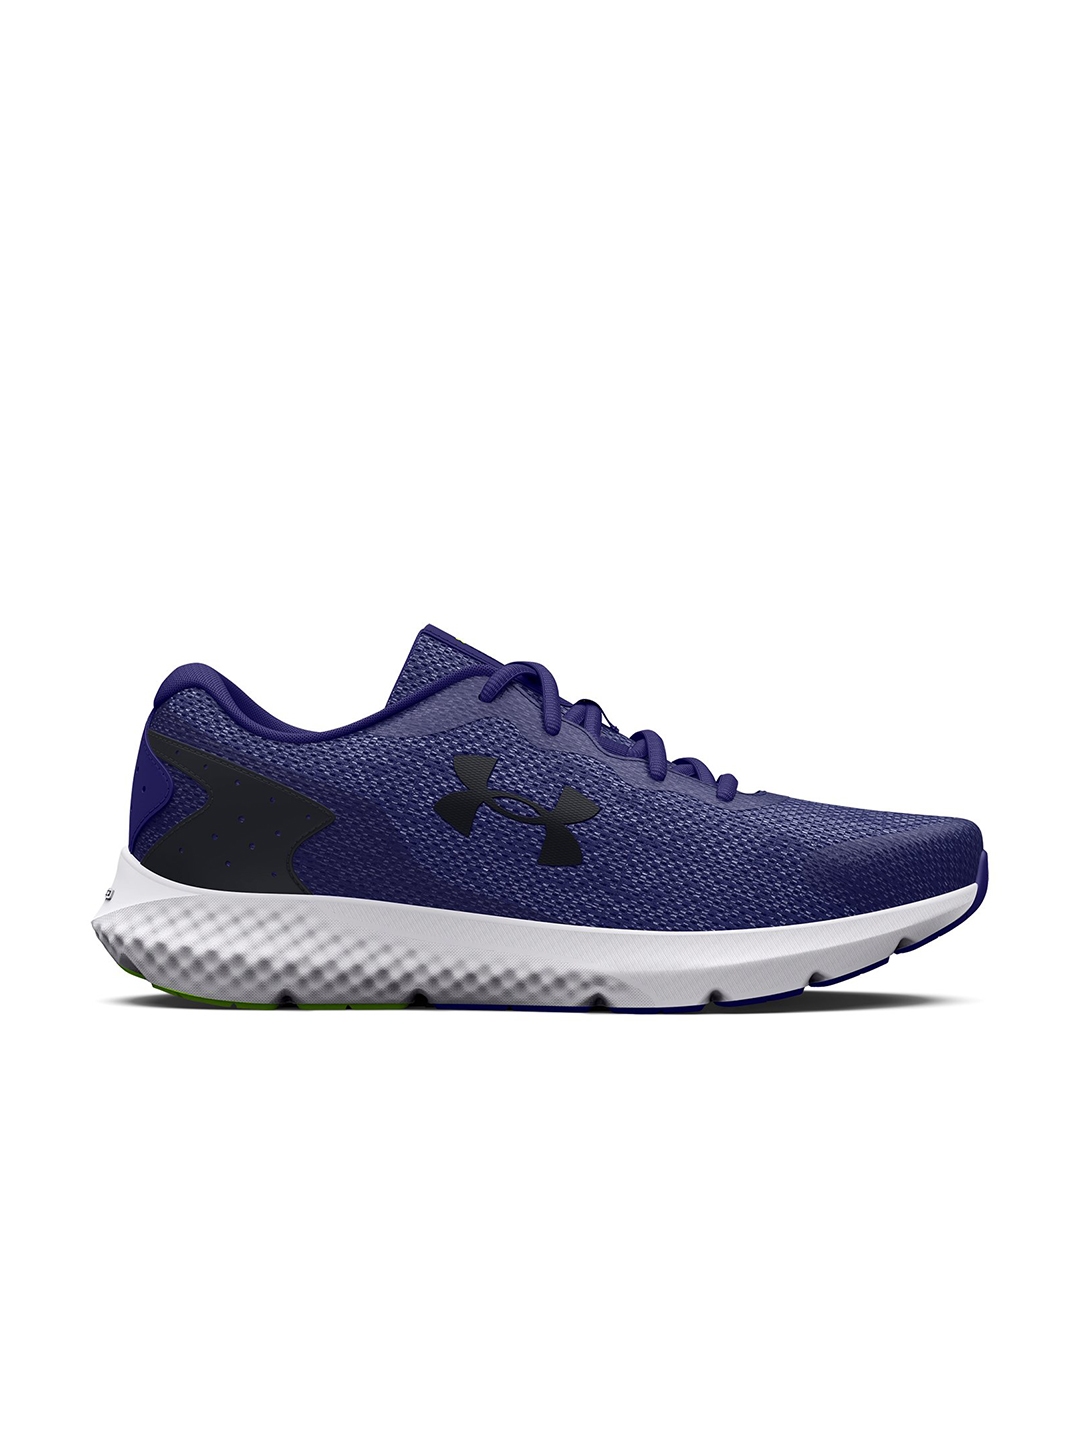 Under Armour Mens Charged Rogue 3 Running Shoe - Sport from   UK